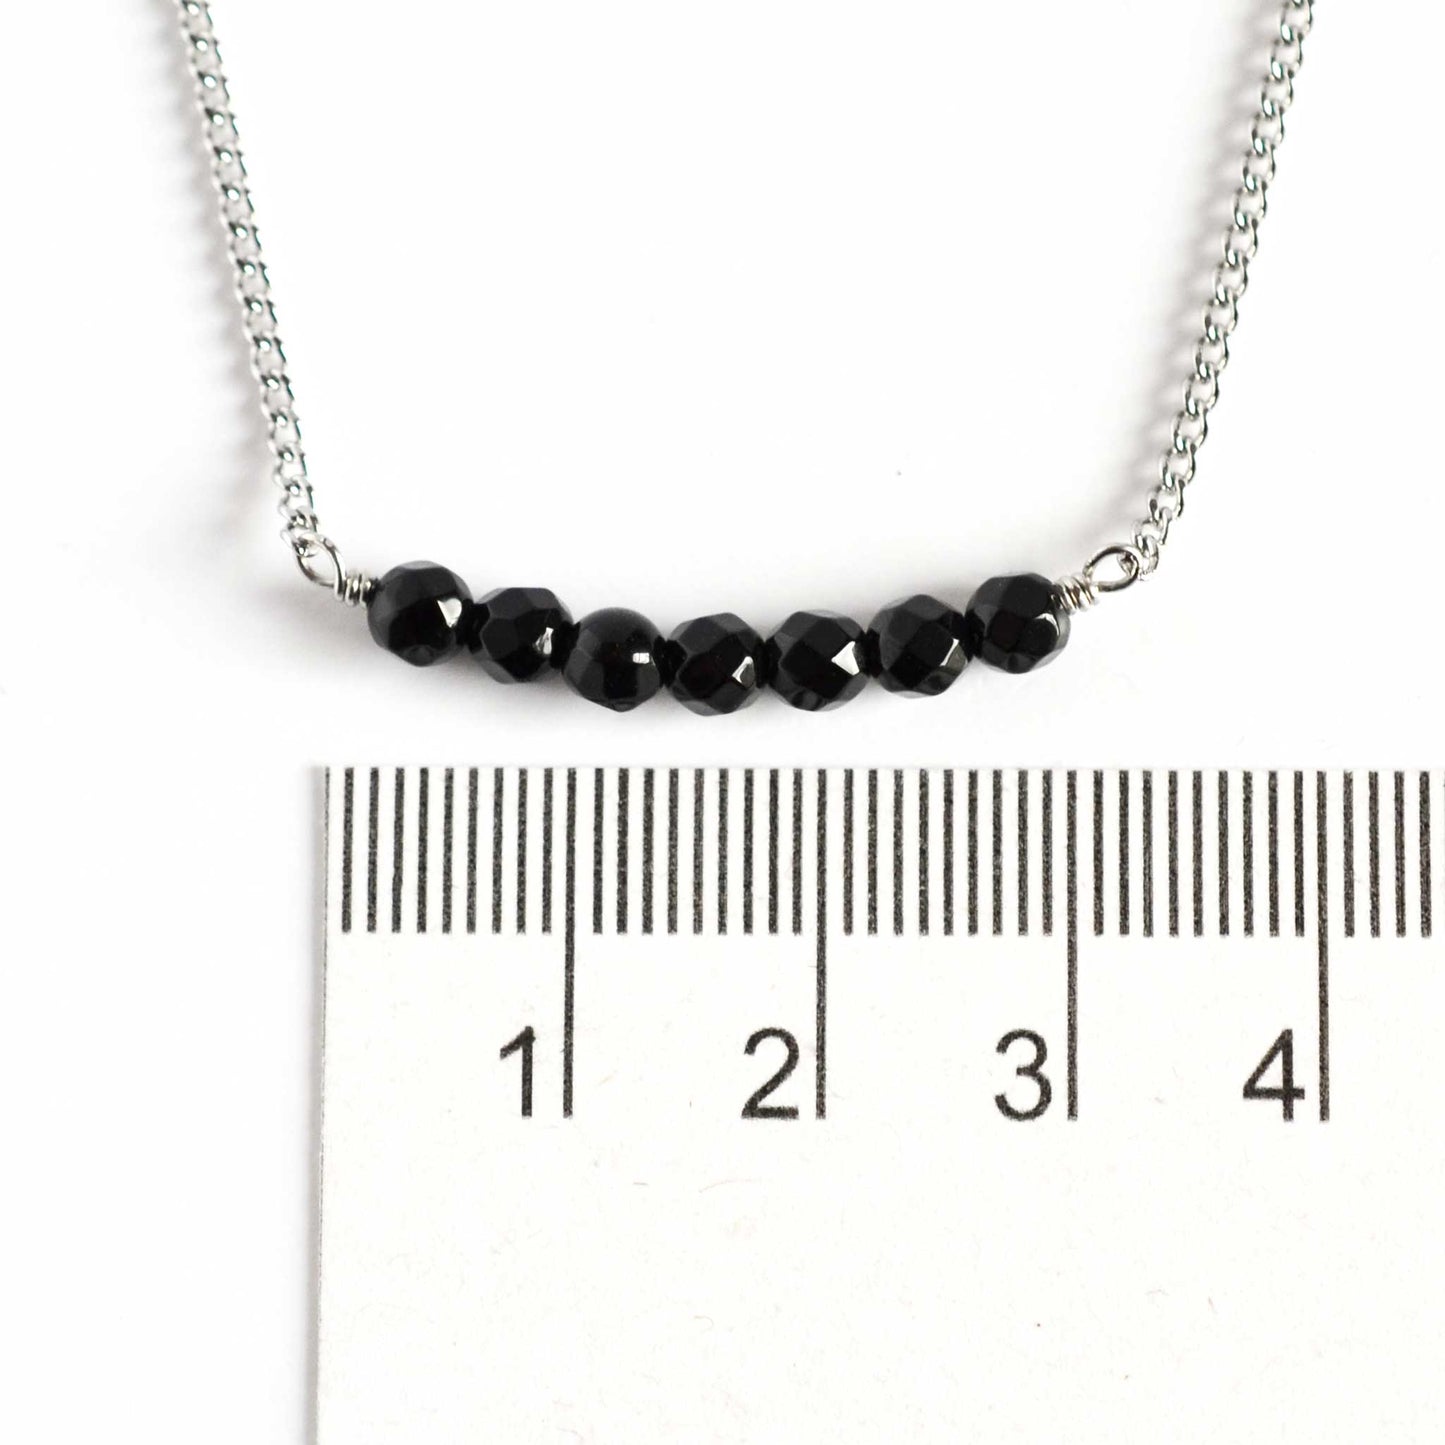 Dainty Onyx necklace with 4mm gemstone beads next to ruler